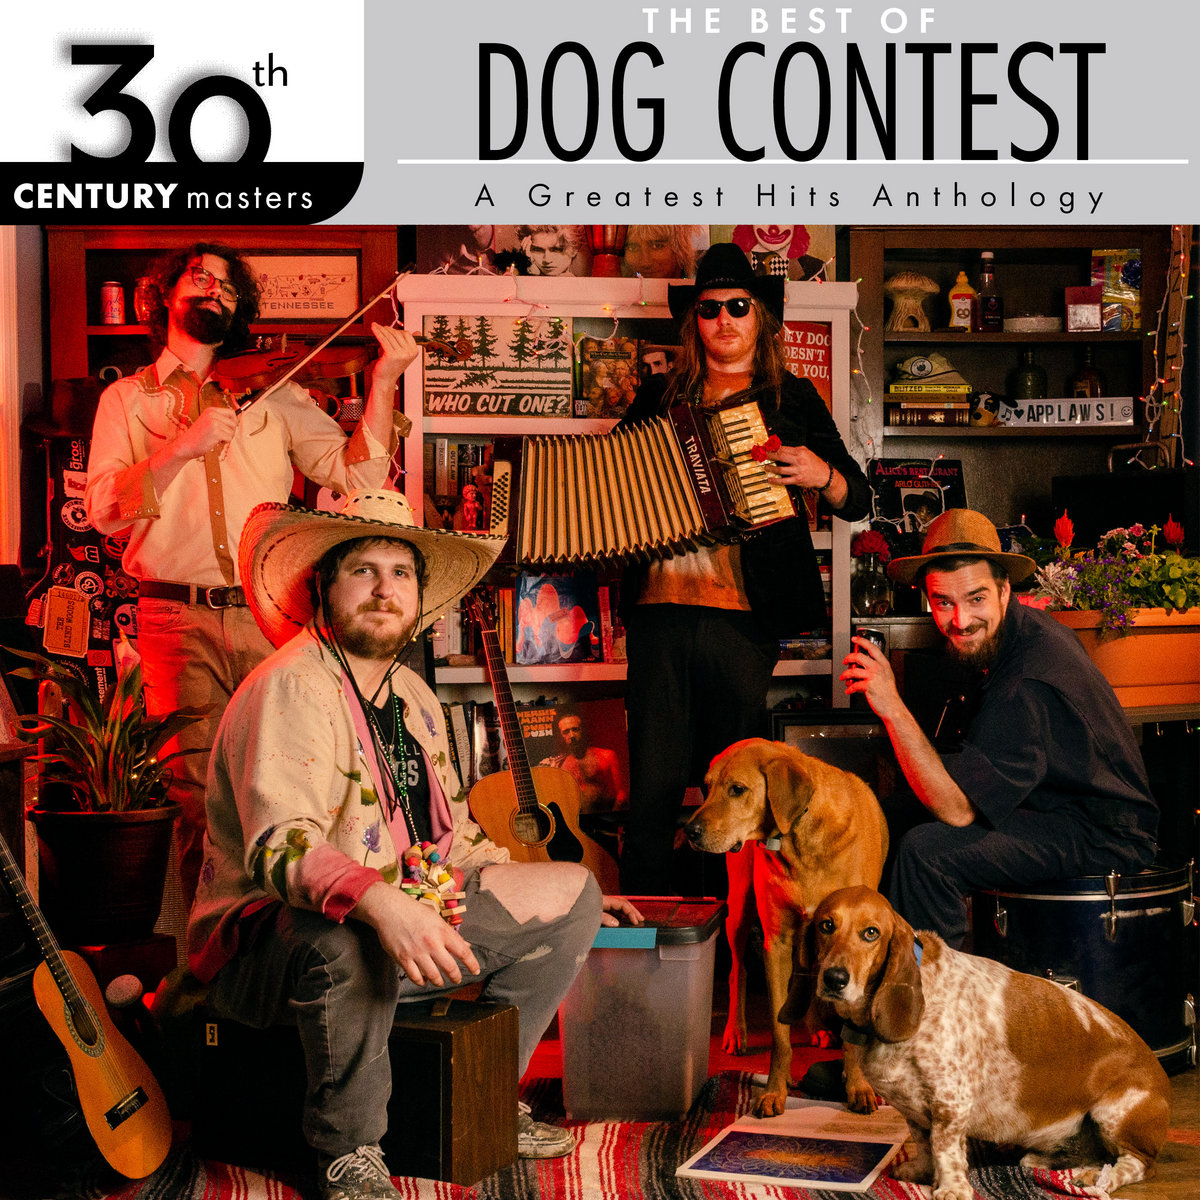 Two Songs from Dog Contest